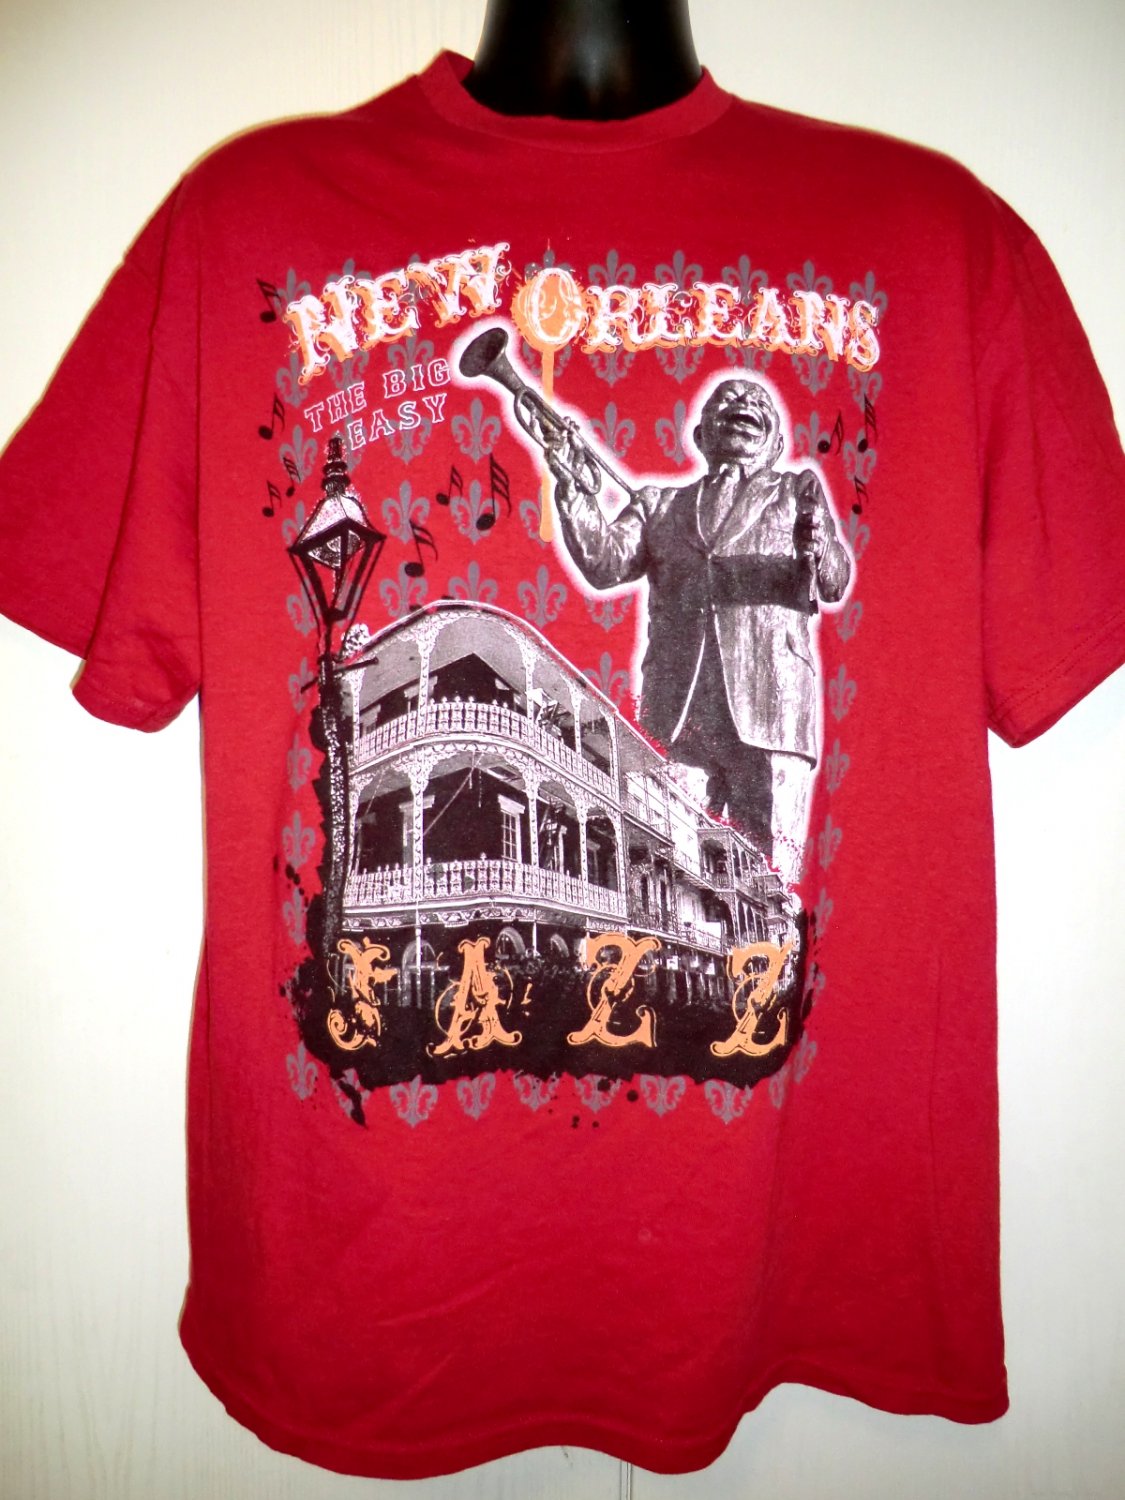 New Orleans The Big Easy T-Shirt